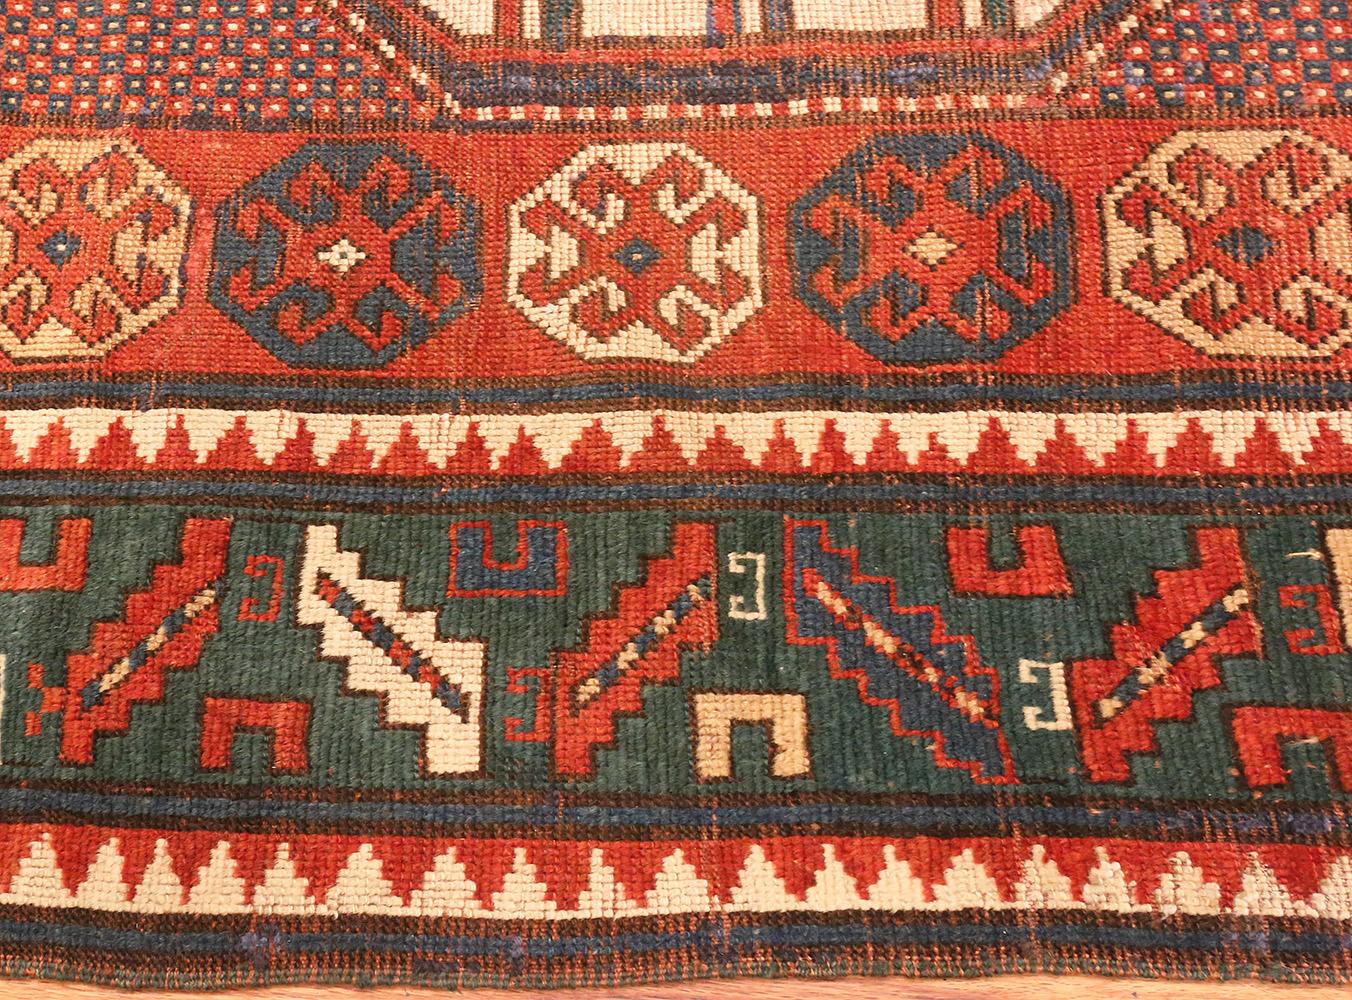 A classically beautiful tribal and Primitive design antique Caucasian Karachopf rug, country of origin / rugs type: Antique Caucasian rugs, circa date: turn of the 20th century (circa 1900). Size: 5 ft 6 in x 7 ft 5 in (1.68 m x 2.26 m)

The